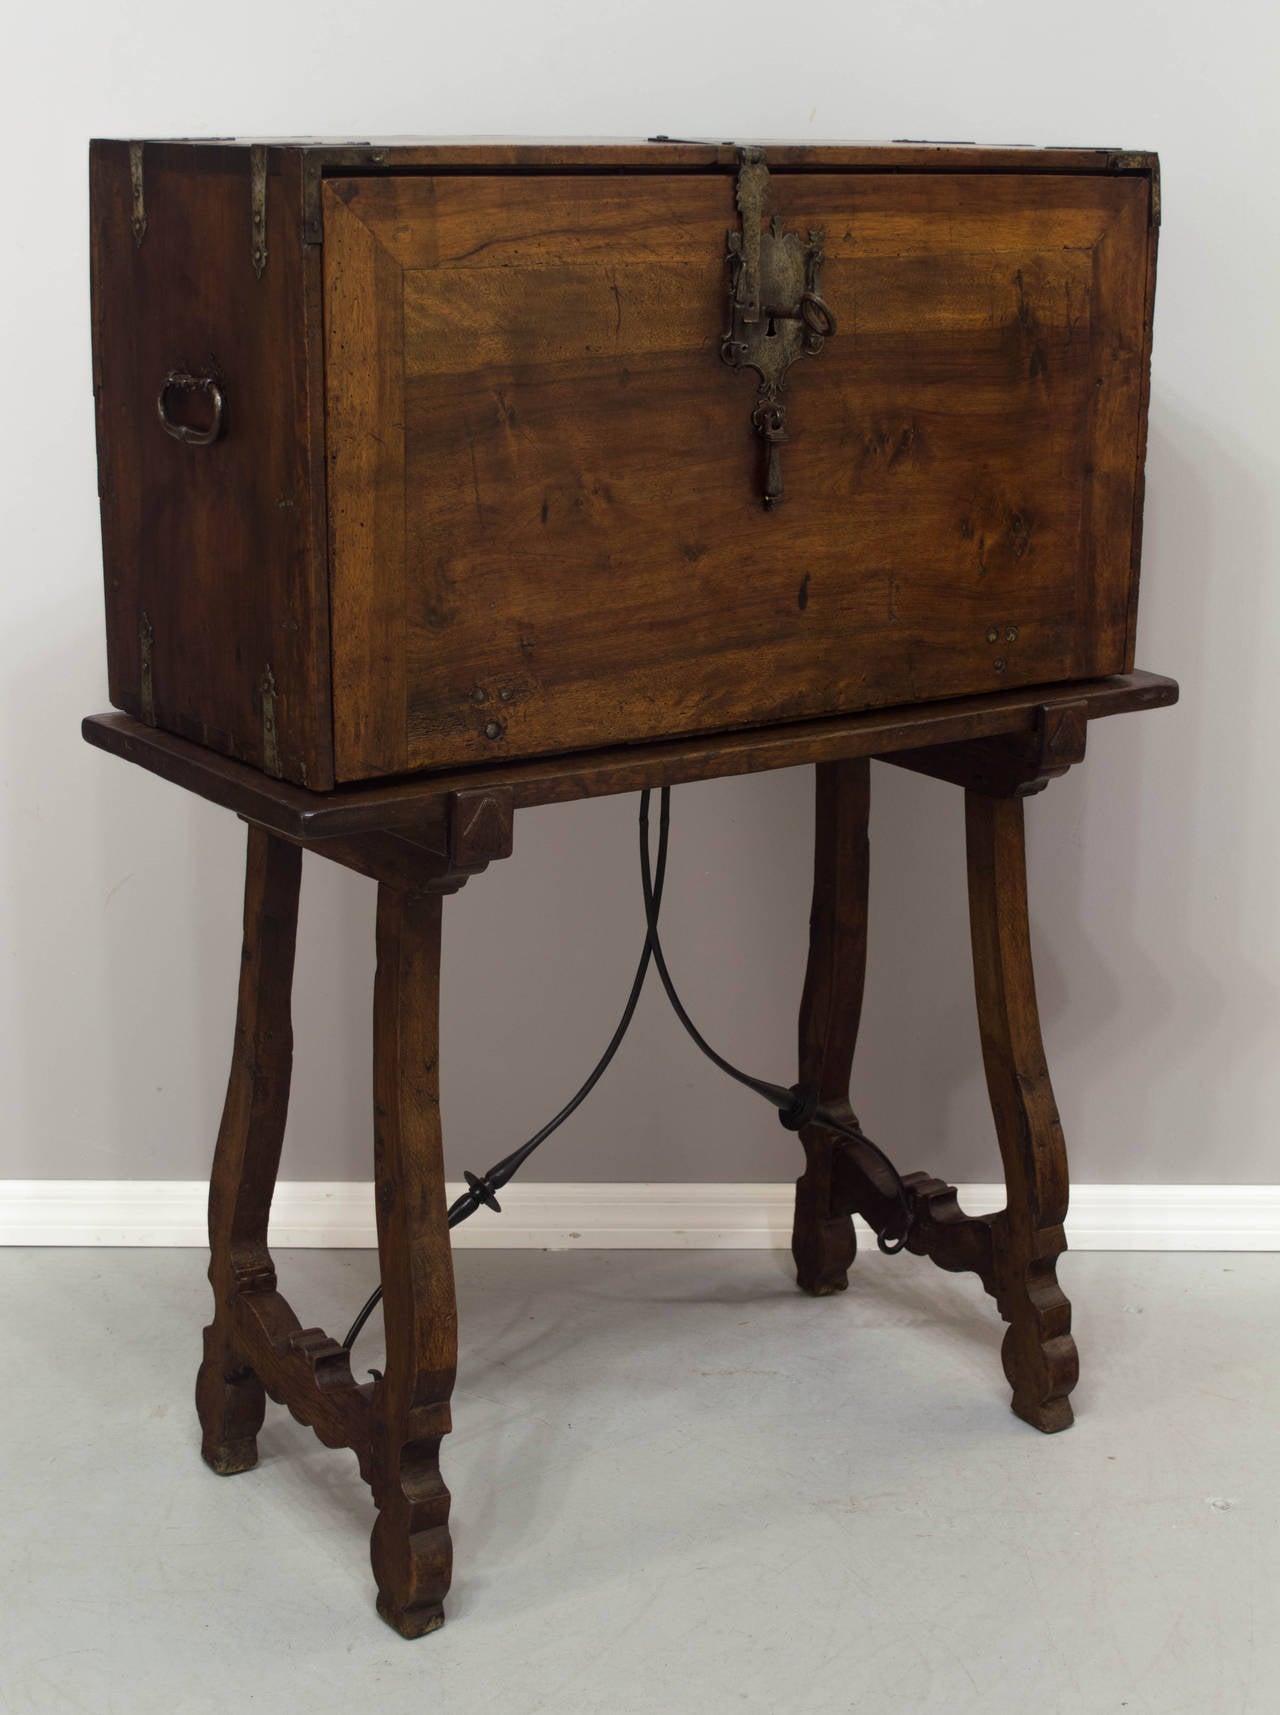 18th century Spanish vargueno (also bargueno) or portable desk, made of hand planed walnut with pegged construction. The drop front opens to an interior that is divided into twelve dovetailed drawers and two cabinets with working locks and keys,